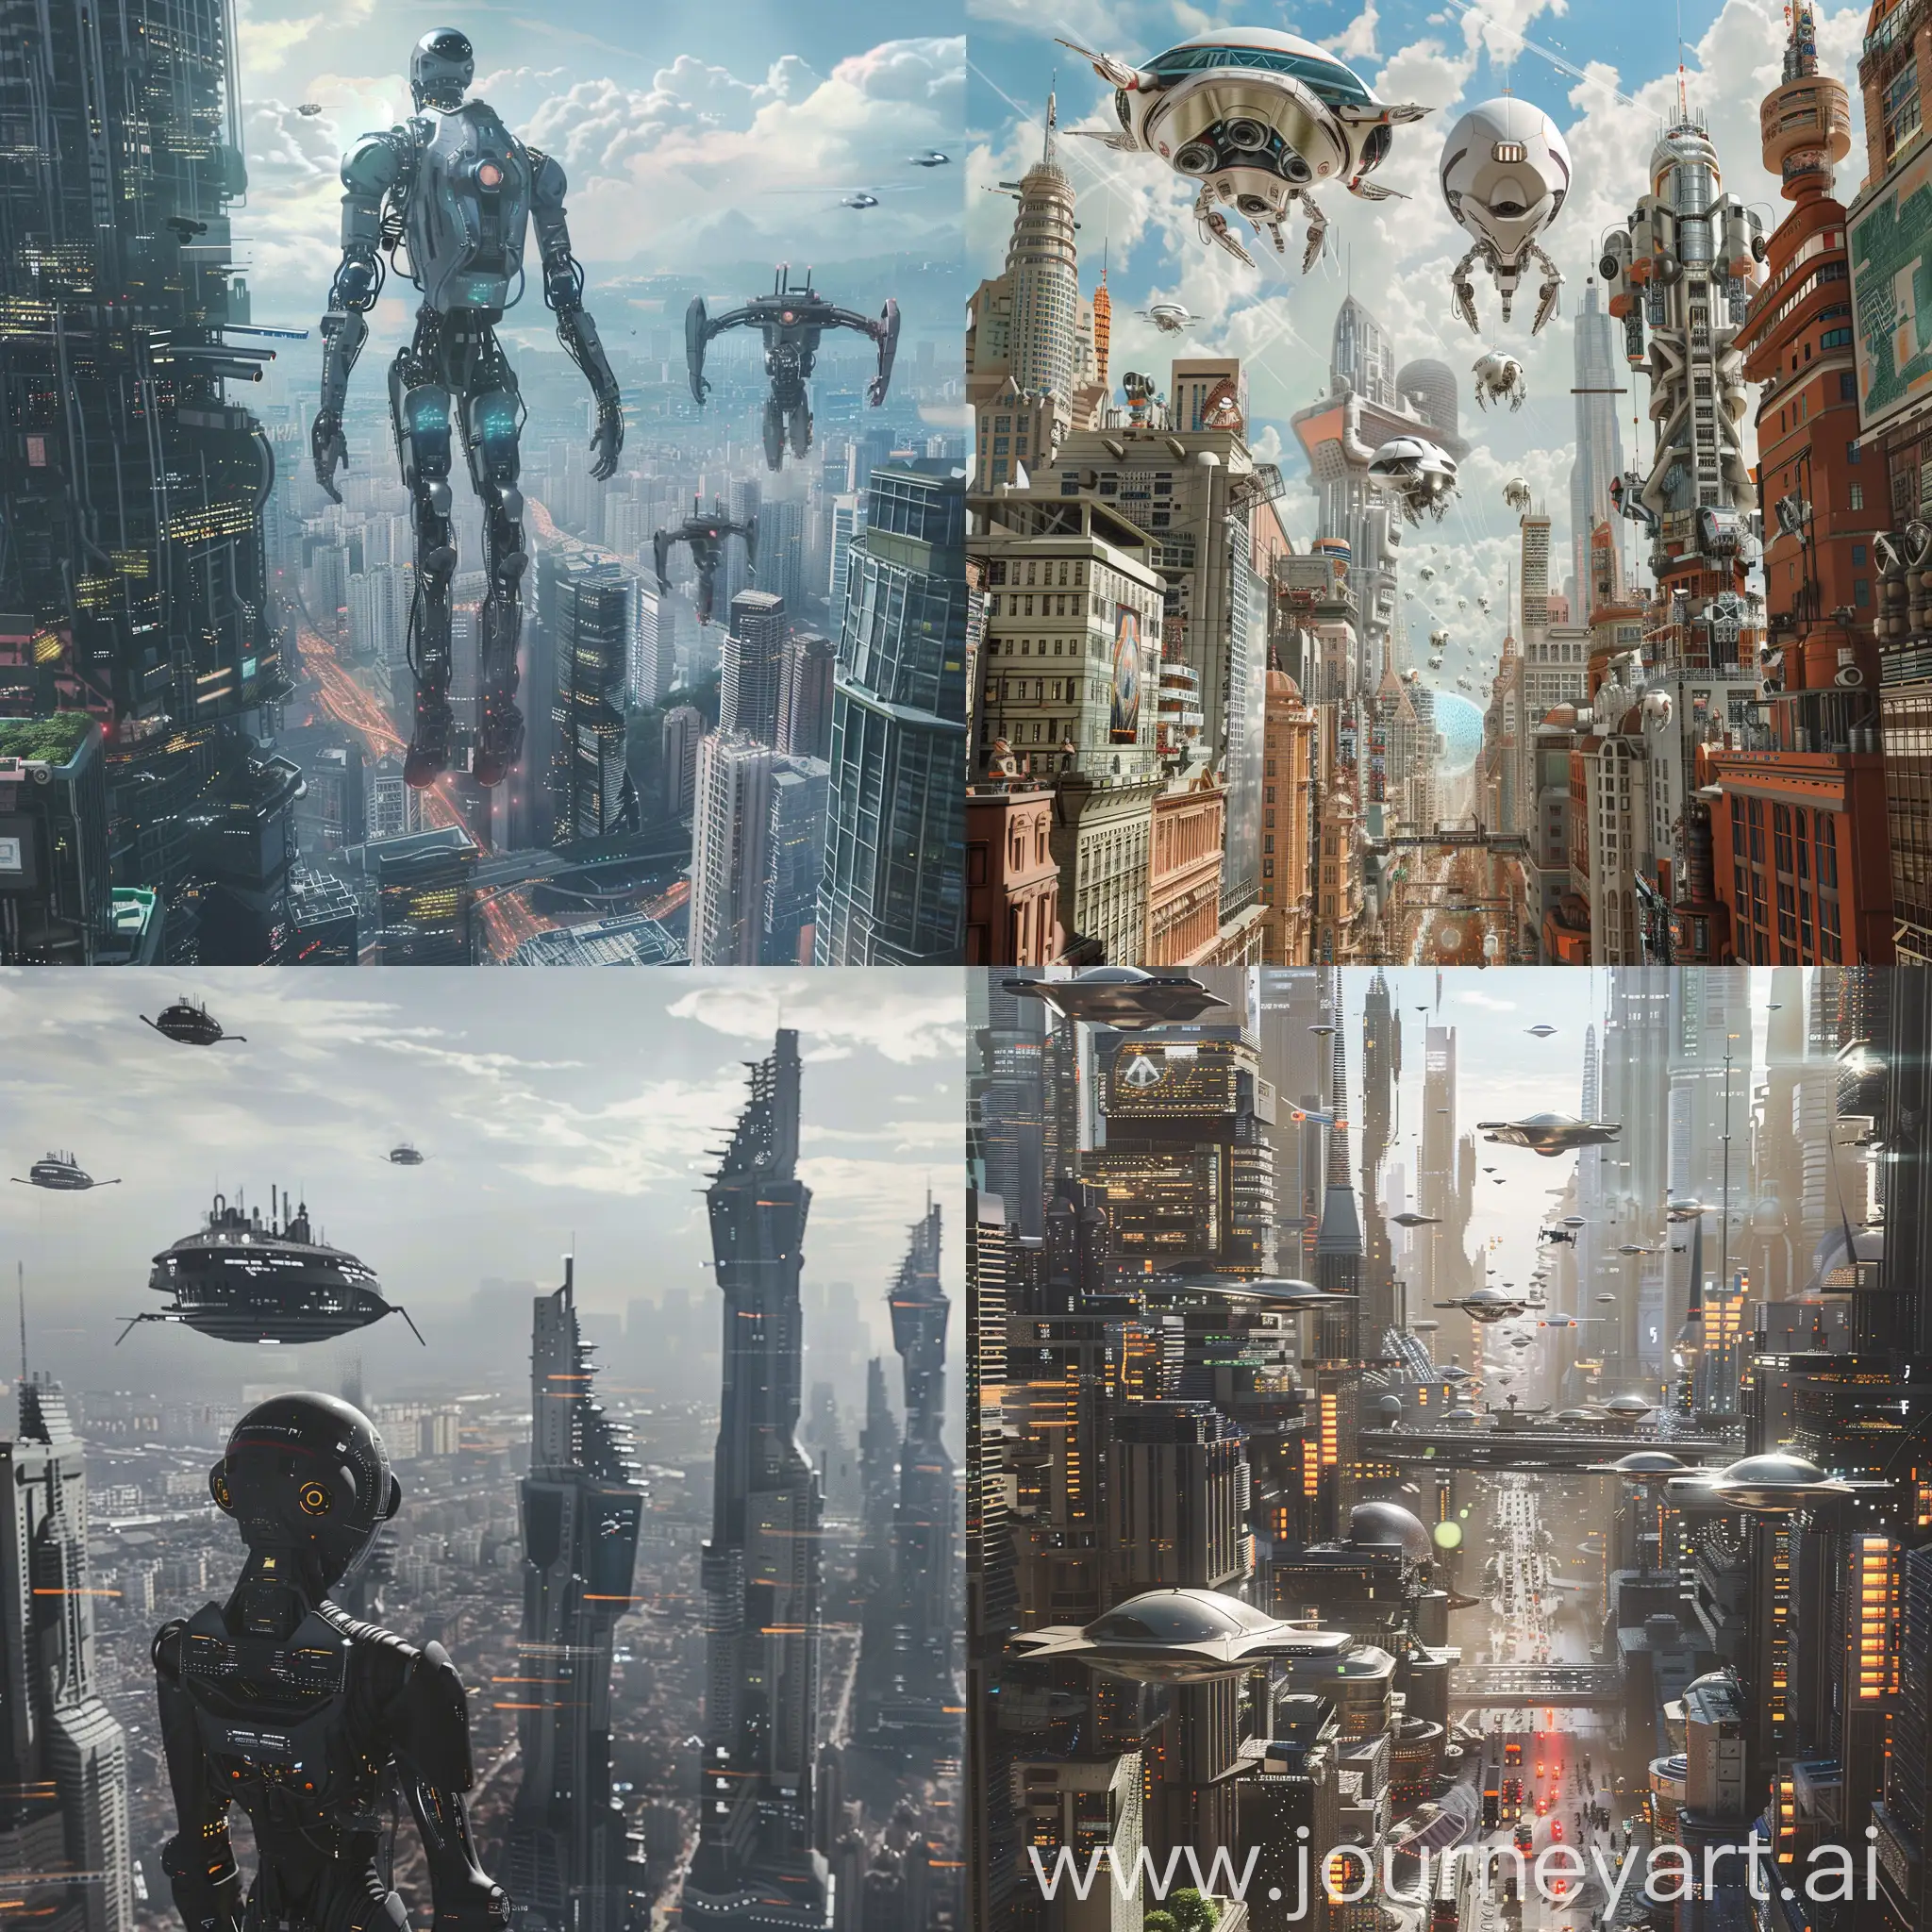 Artificial-Humans-in-Futuristic-City-with-Robotic-Structures